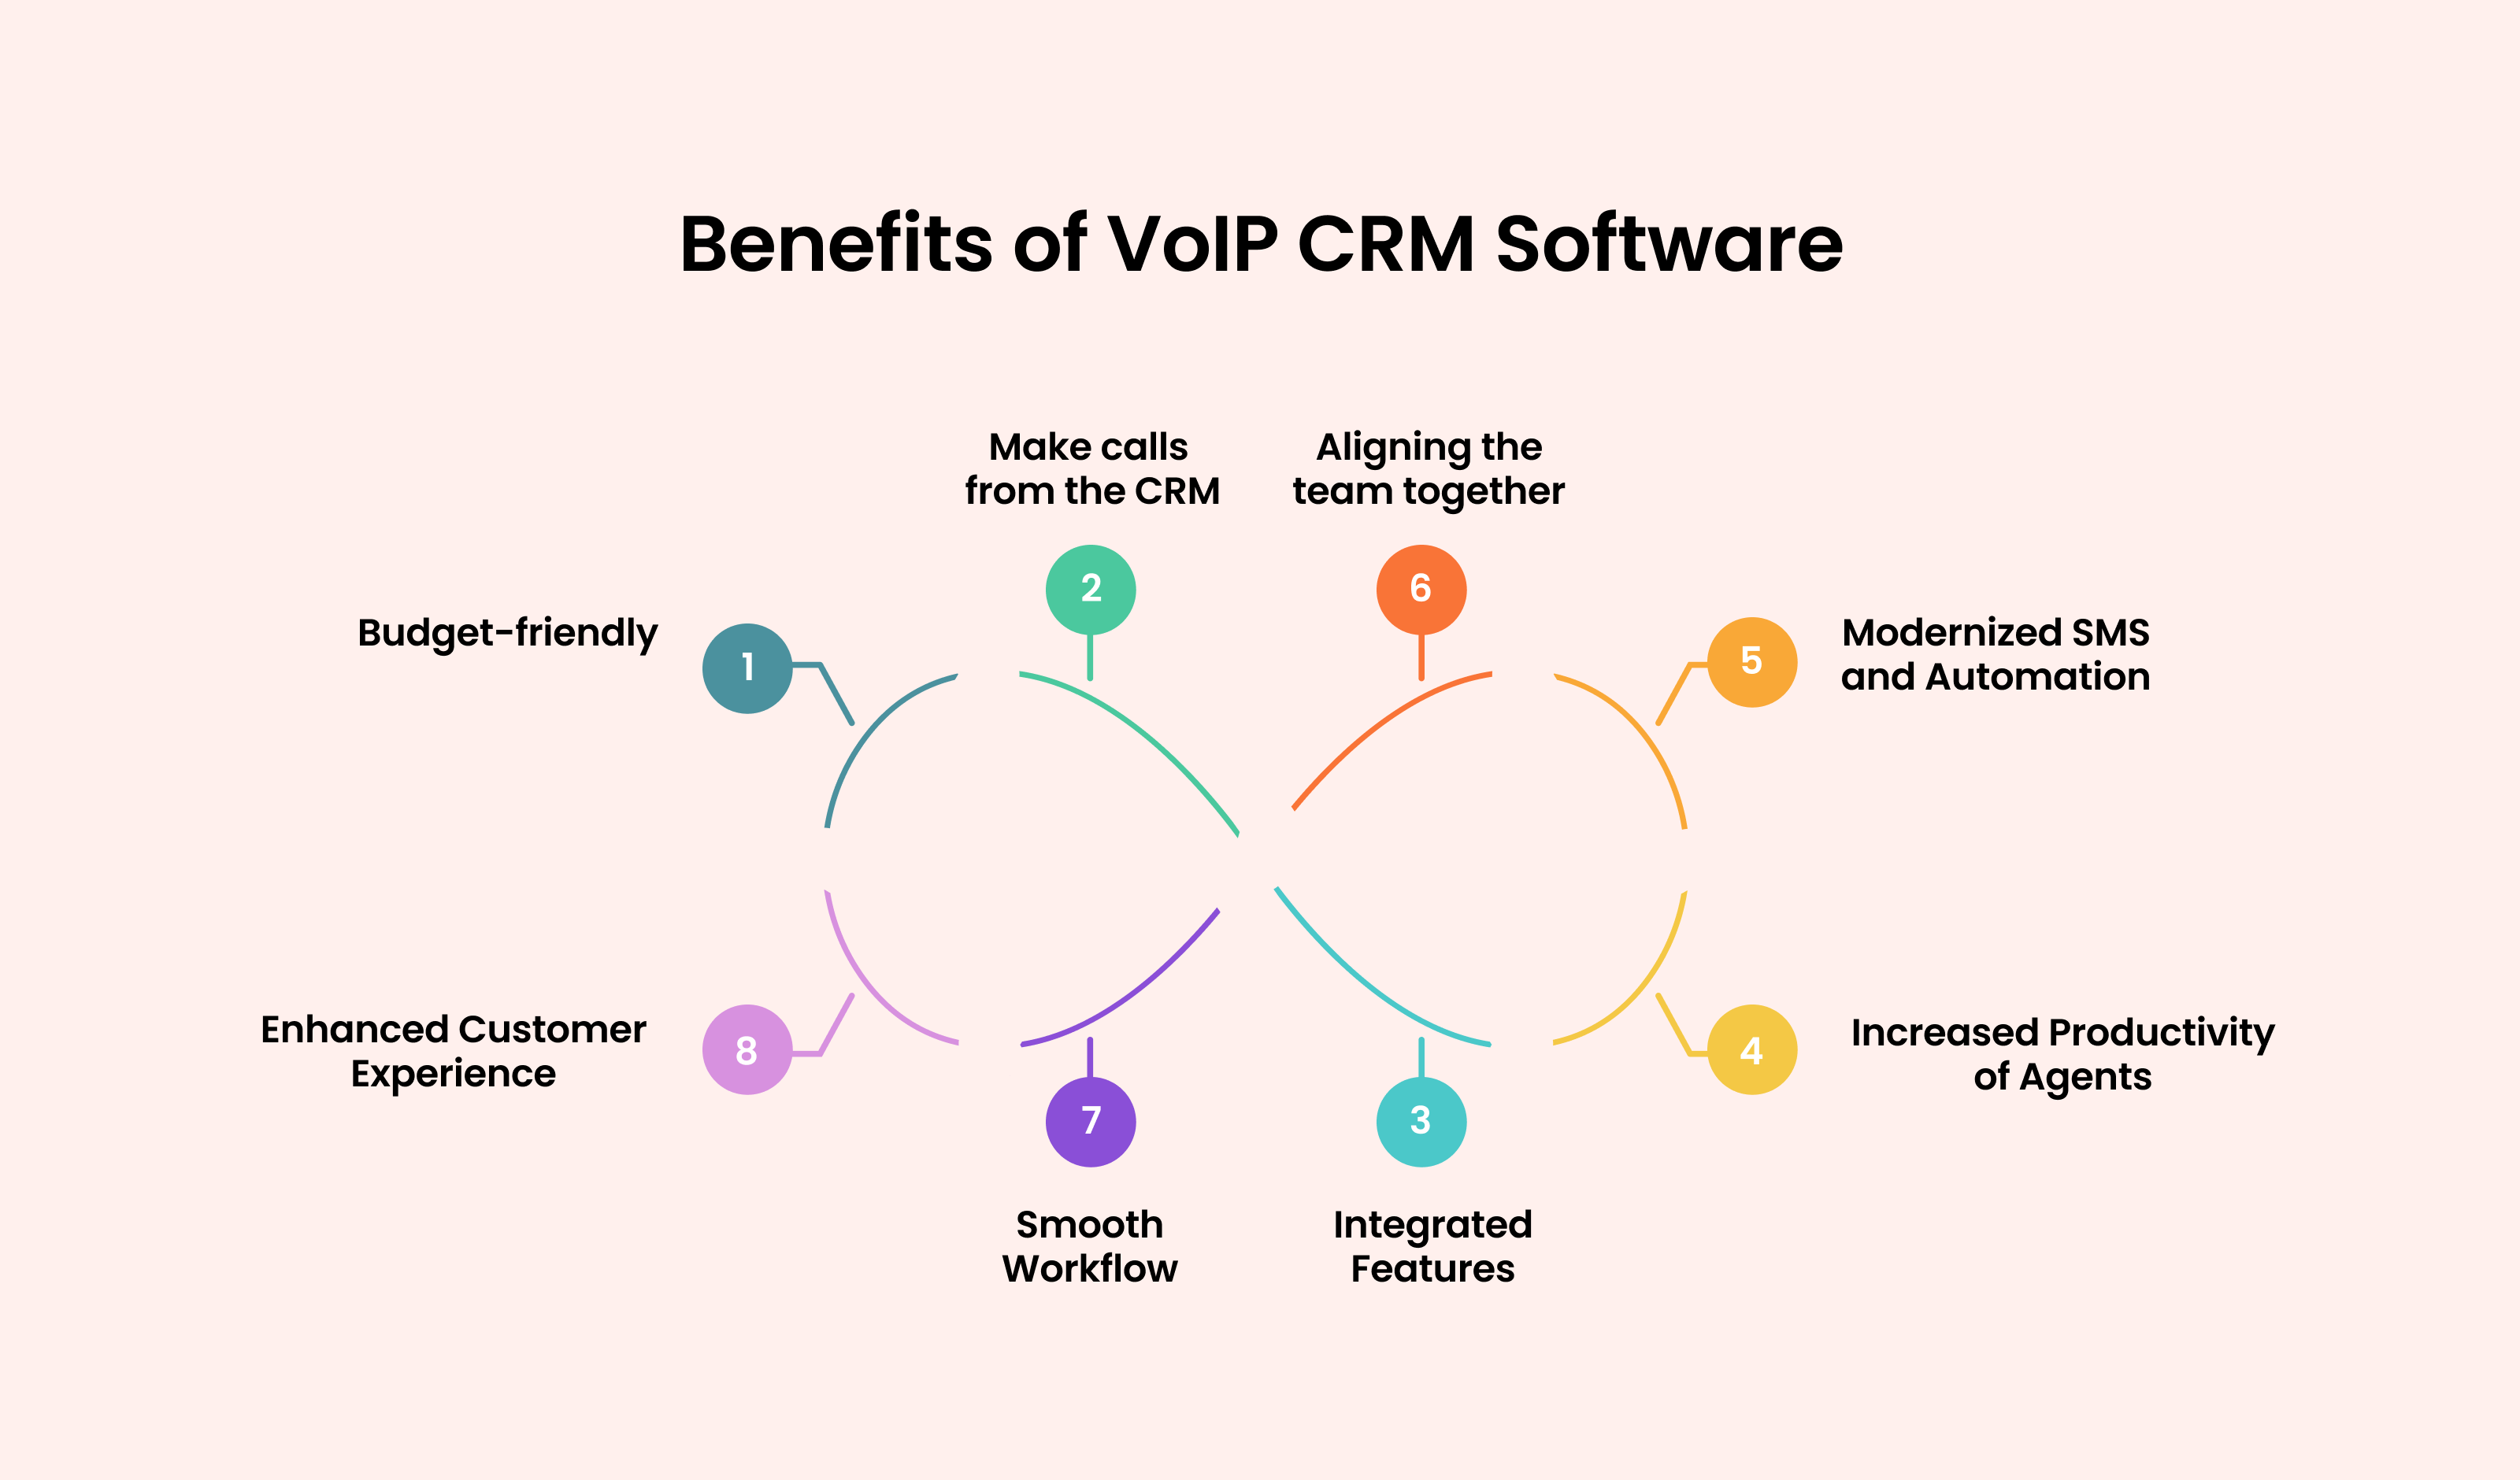 Benefits of VoIP CRM Software: